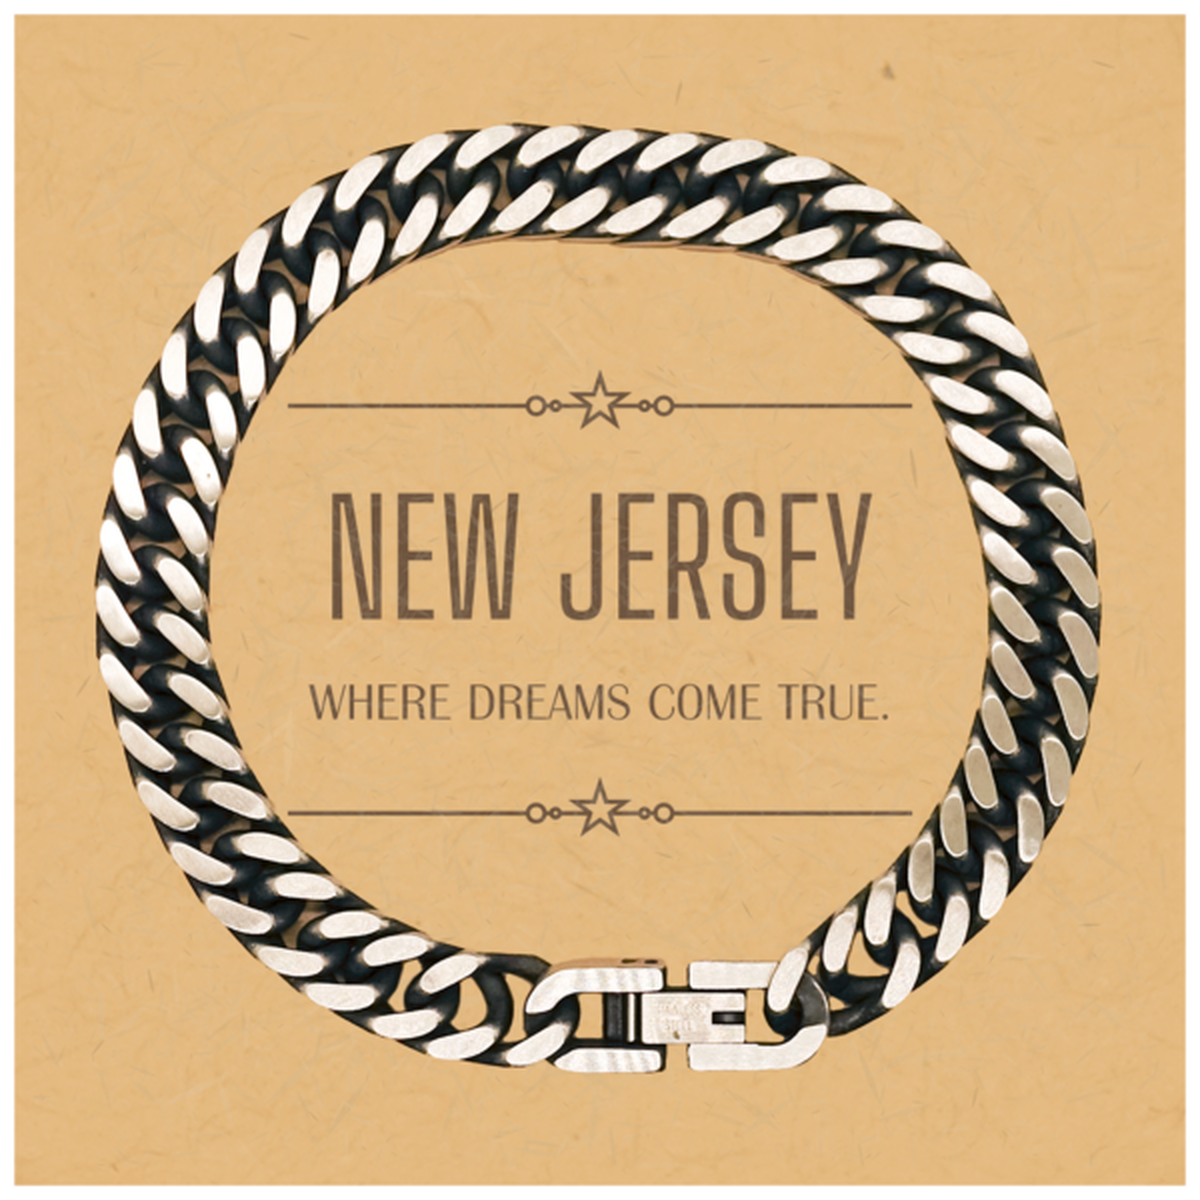 Love New Jersey State Cuban Link Chain Bracelet, New Jersey Where dreams come true, Birthday Christmas Inspirational Gifts For New Jersey Men, Women, Friends